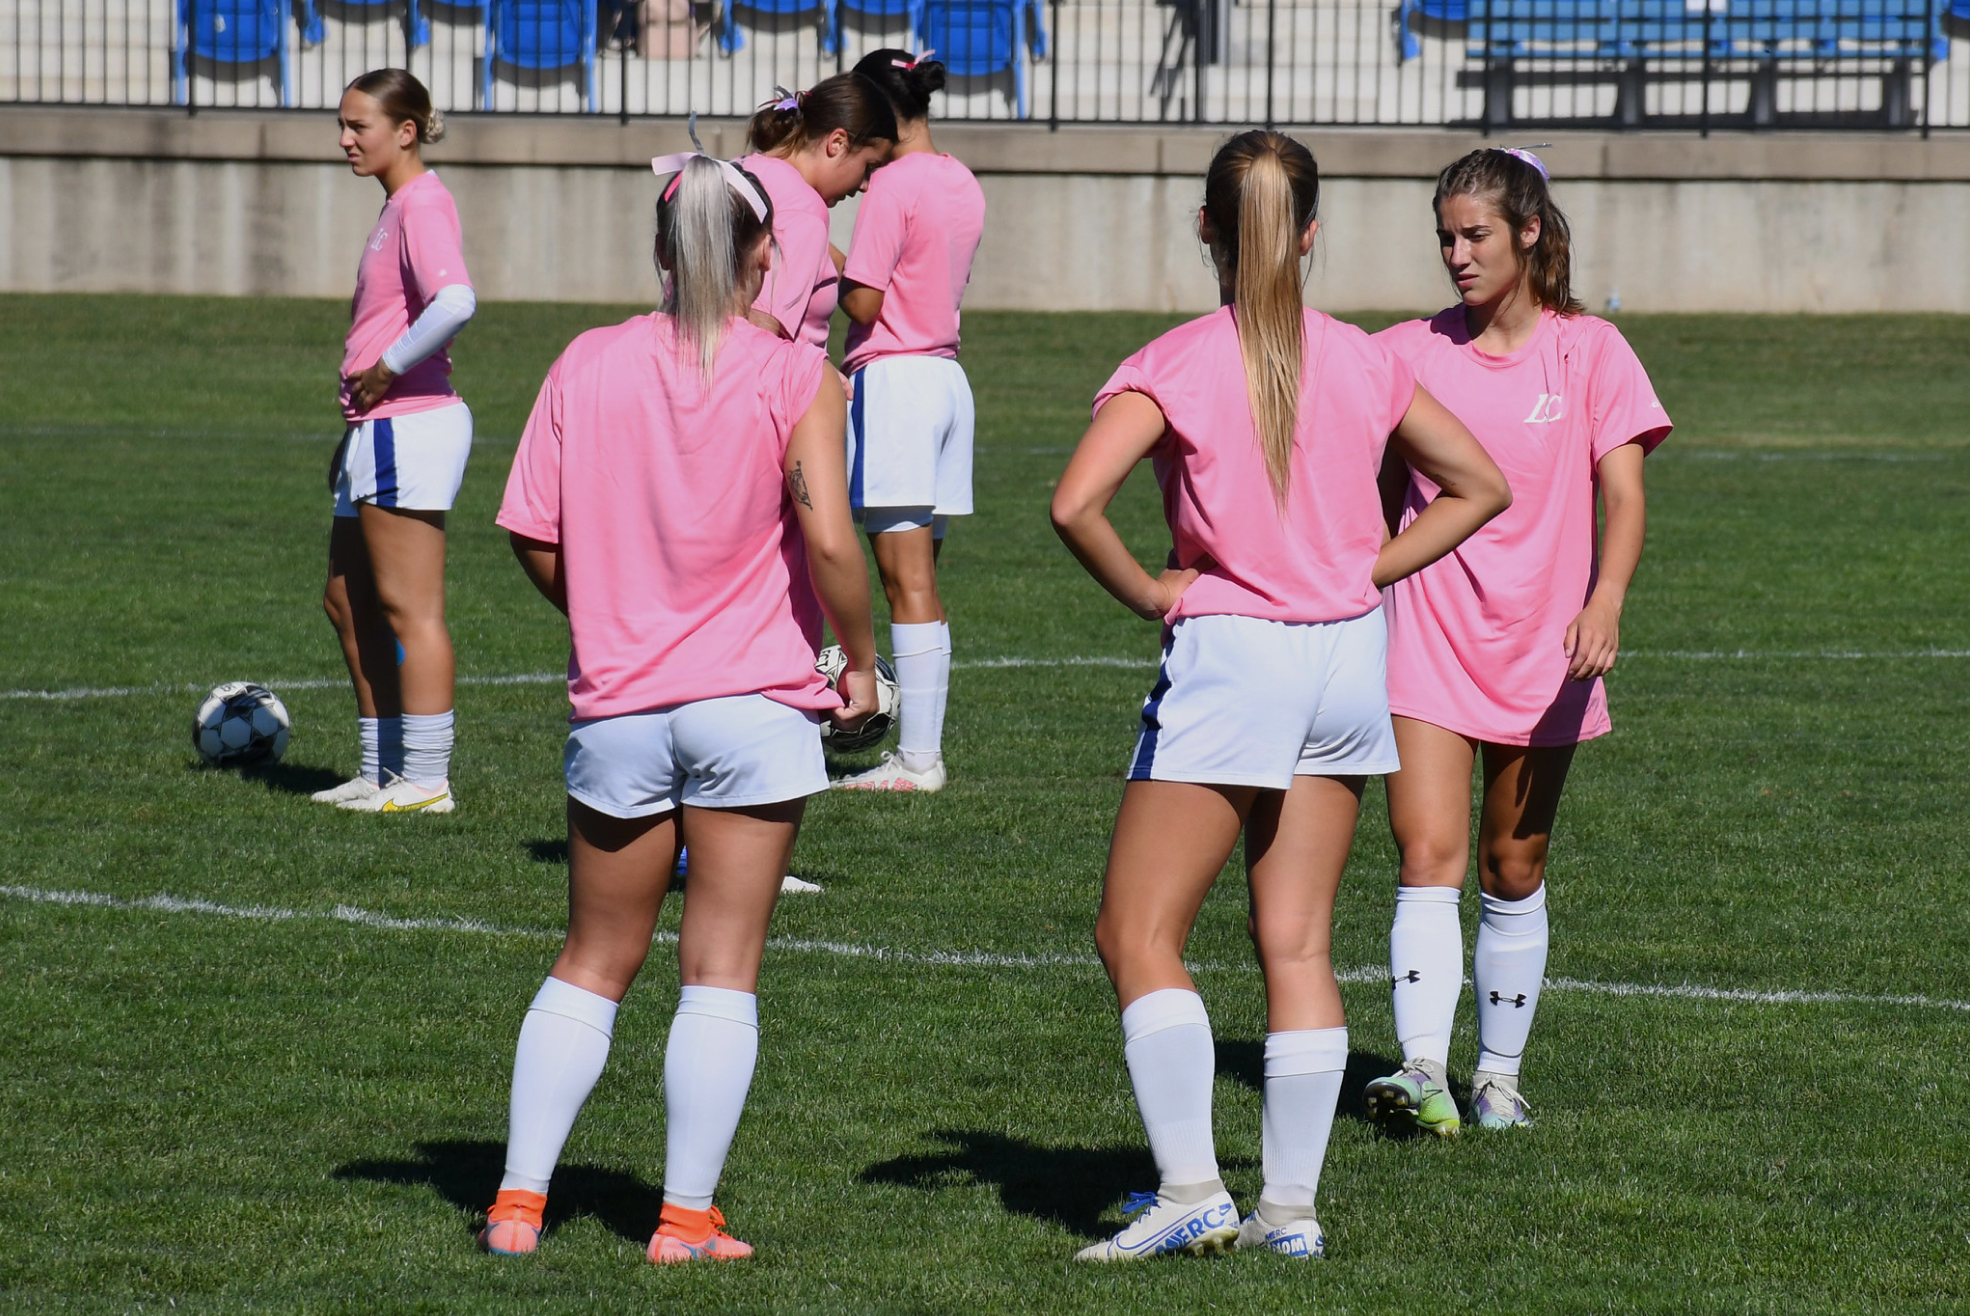 Girls Soccer Players warm up before the game.